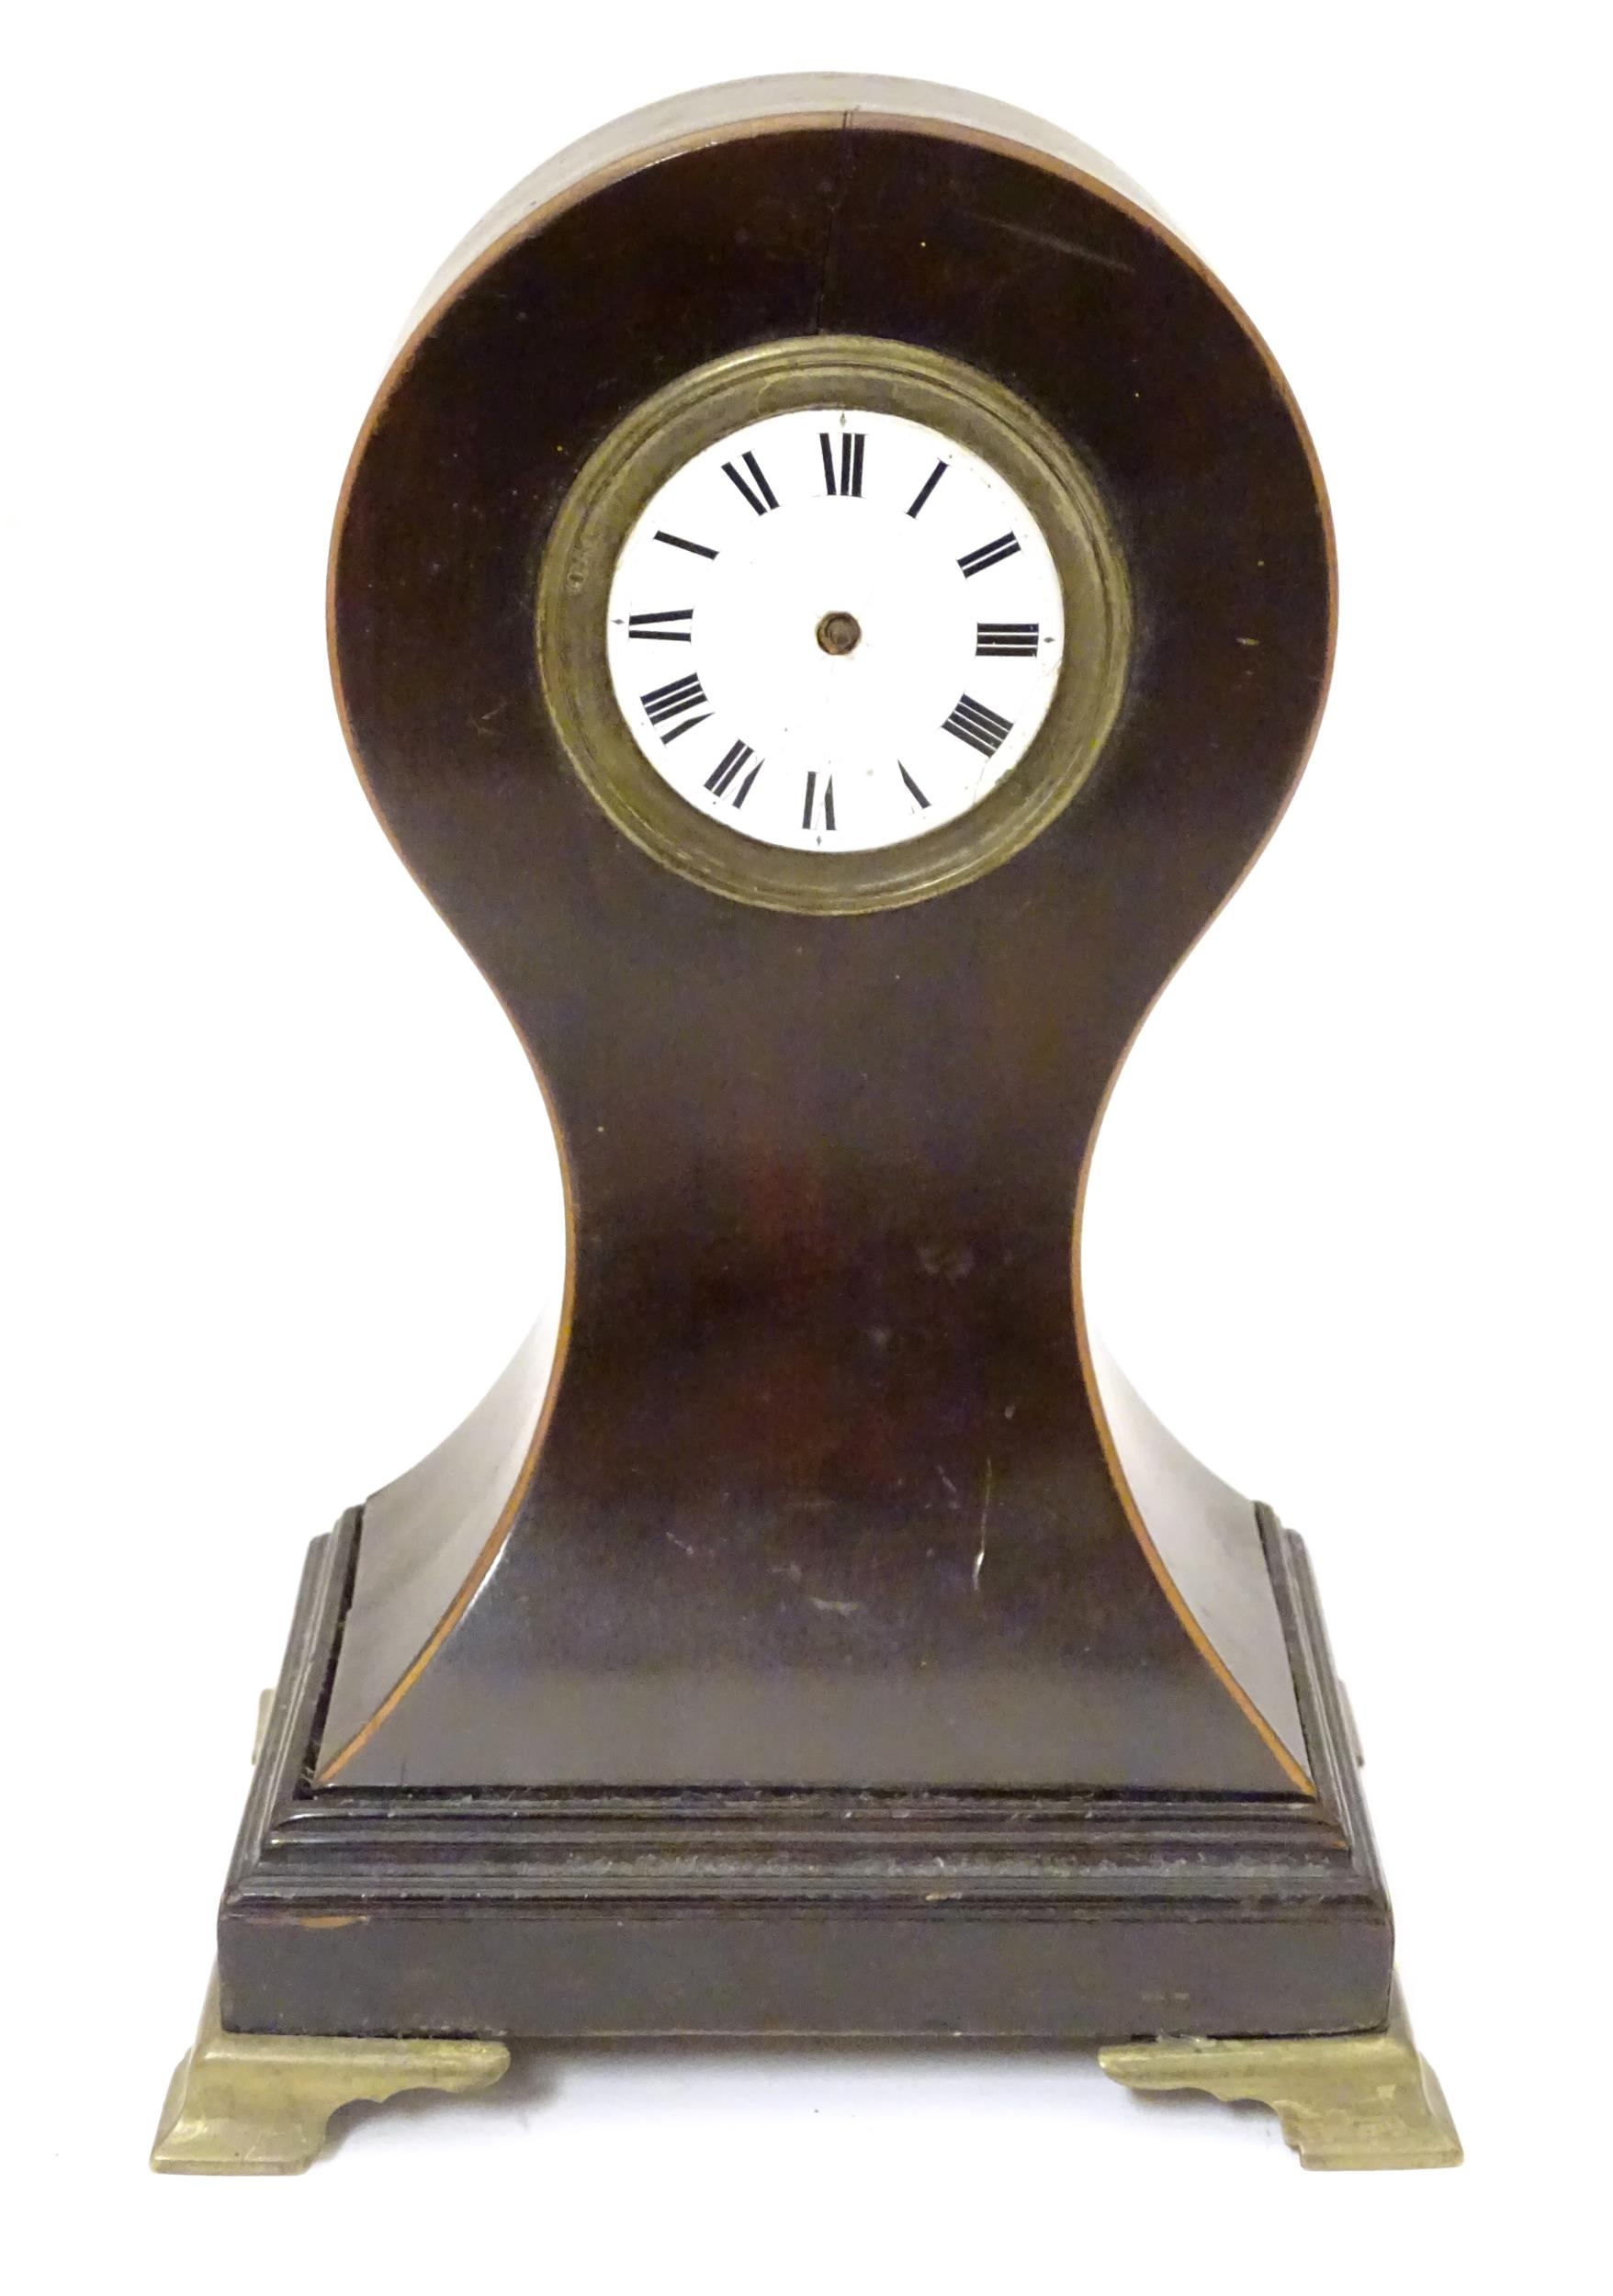 A Victorian pocket watch stand formed as a balloon shaped mantel clock. The whole standing 8 1/2"